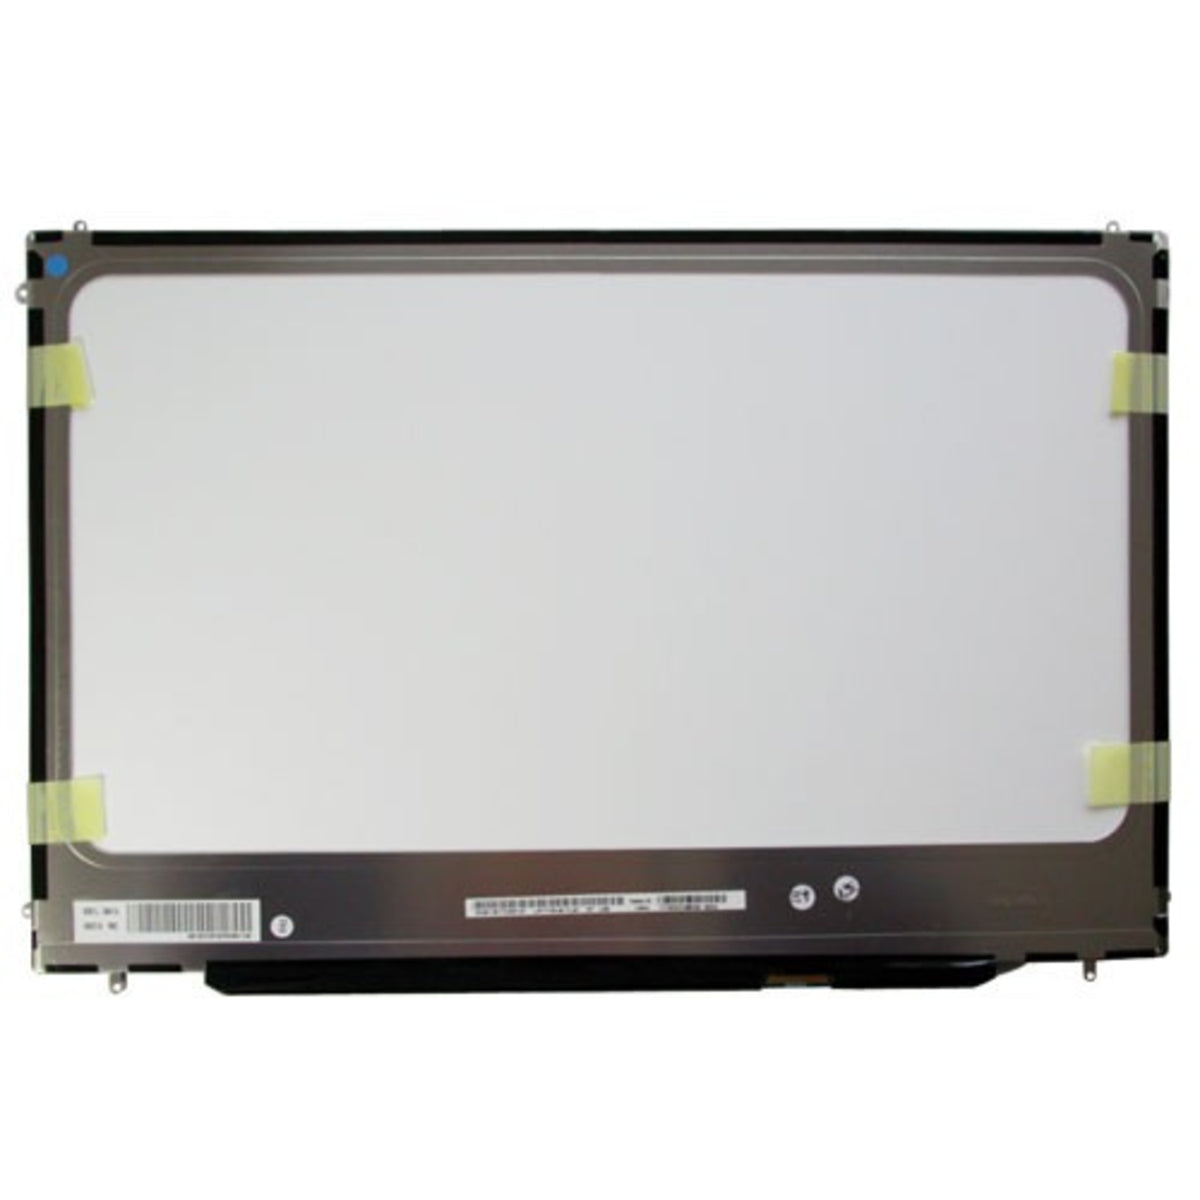 New LCD Screen LTN170CT10-G01 For Apple MacBook Pro Retina 17" A1297 EARLY 2009-LATE 2011 LCD Only